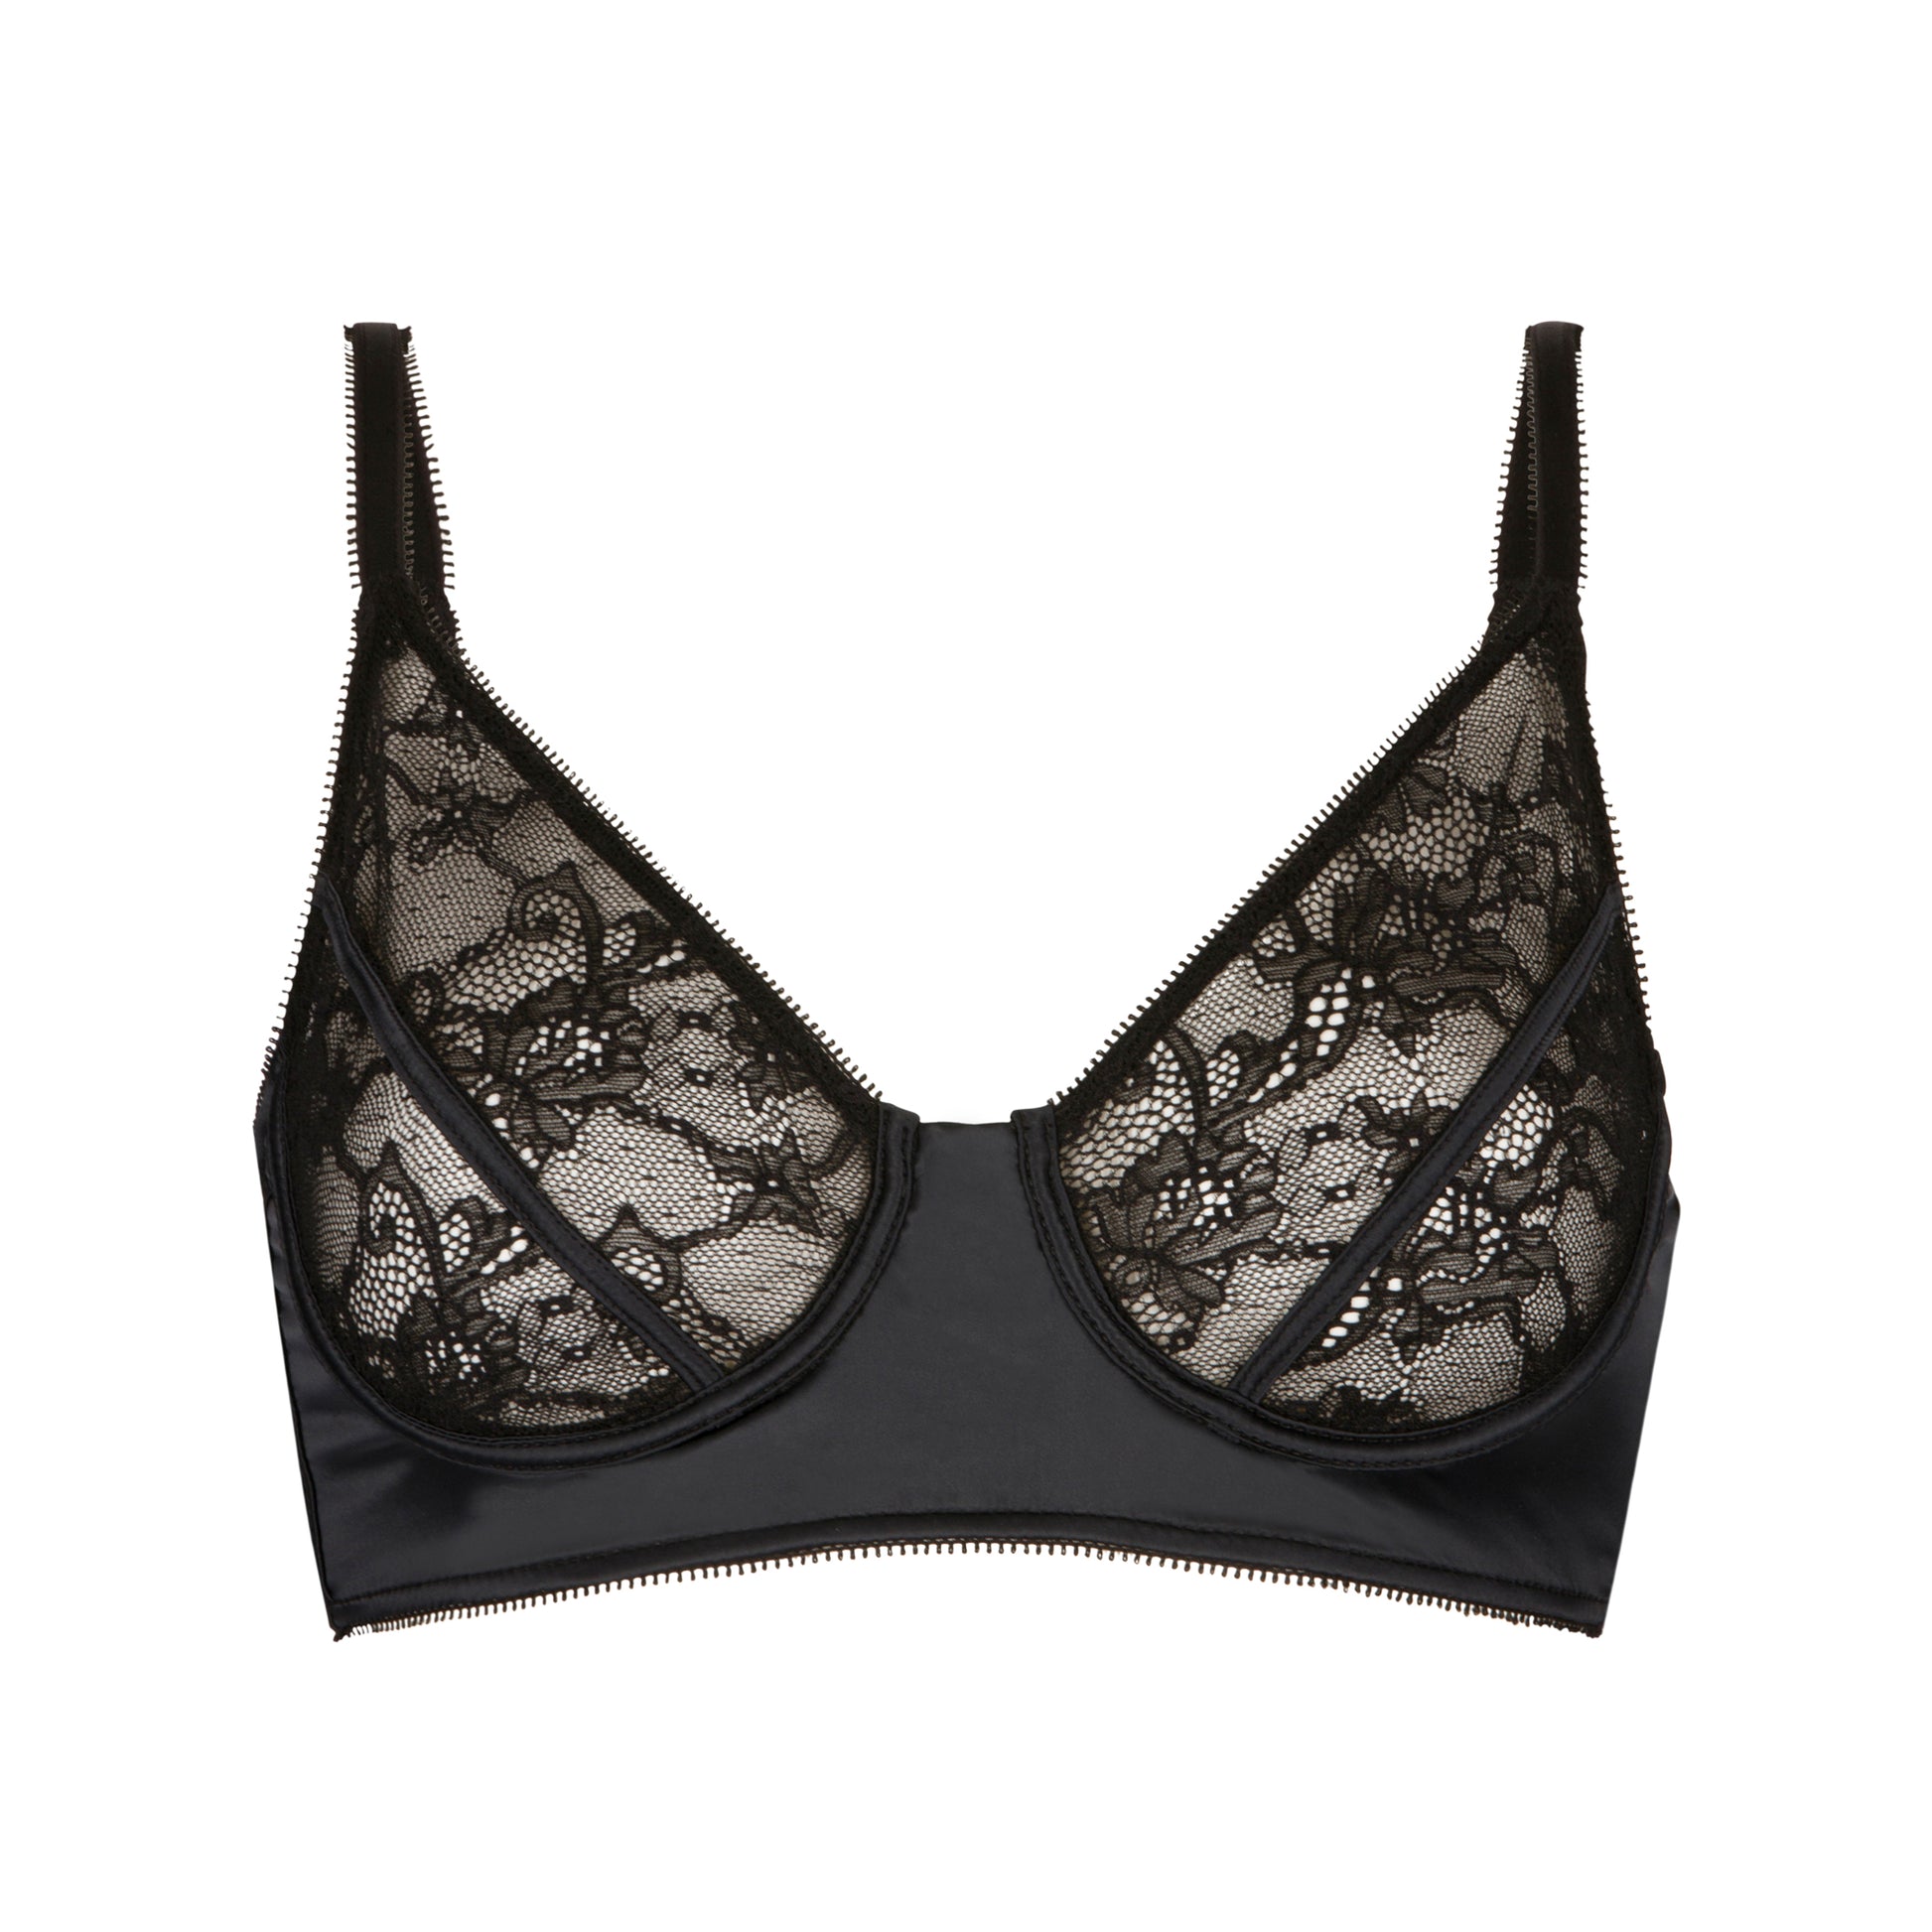 Corbeille - Stay new collection - Maud et Marjorie Lingerie